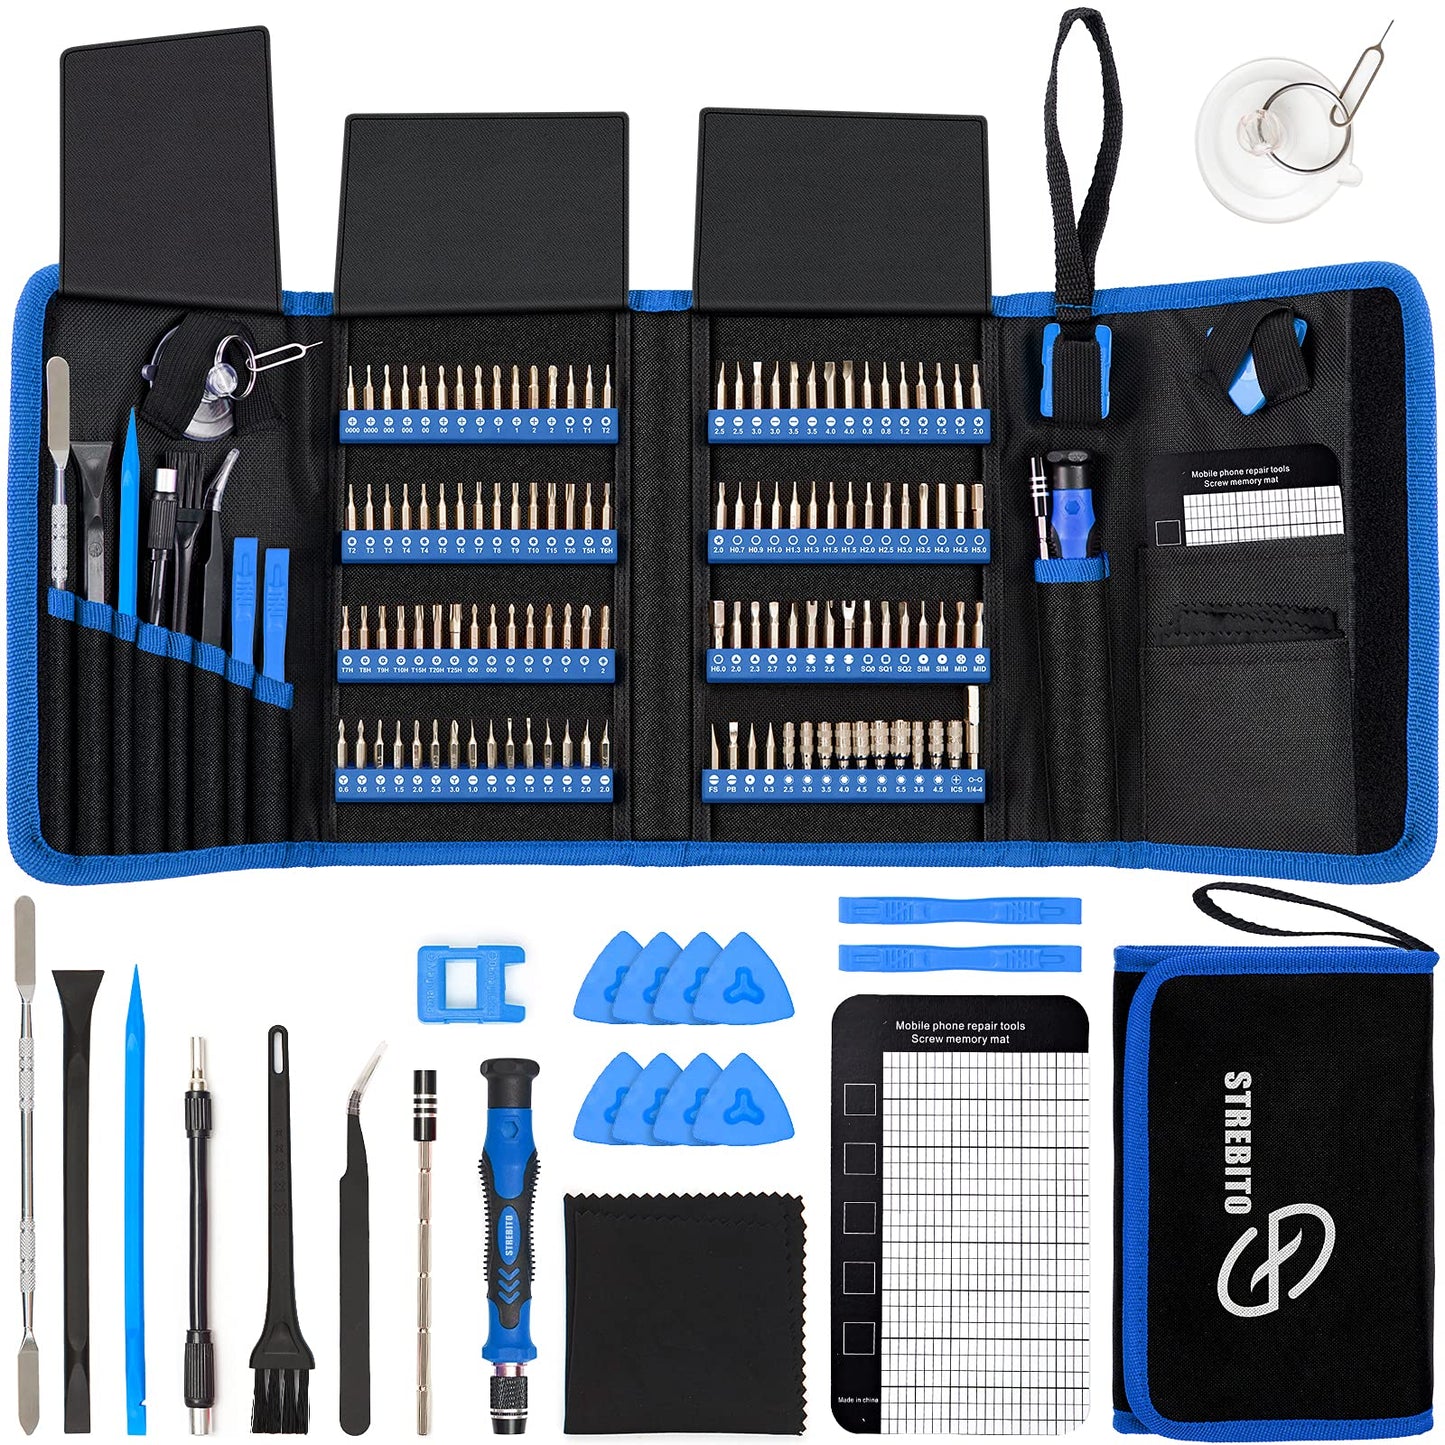 STREBITO Electronics Precision Screwdriver Sets 142-Piece with 120 Bits Magnetic Repair Tool Kit for iPhone, MacBook, Computer, Laptop, PC, Tablet,